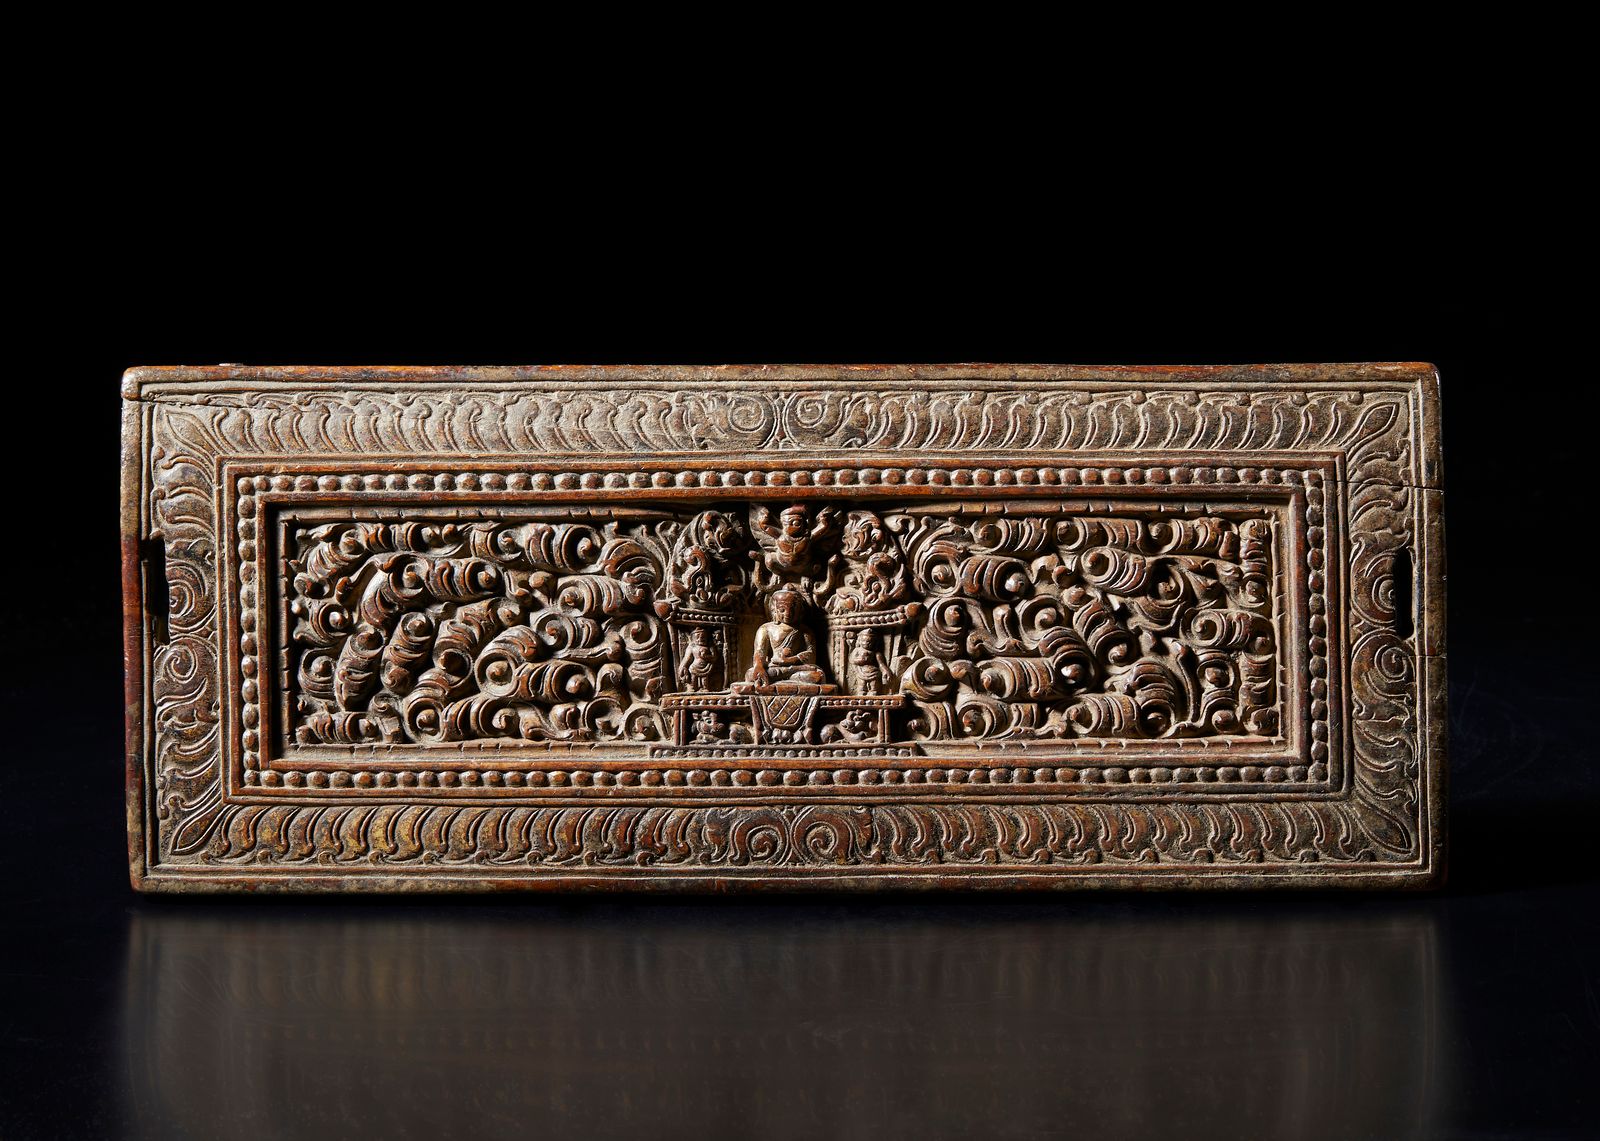 Himalayan Art A wooden book cover carved with the Medicine Buddha 喜马拉雅艺术。雕刻着药师佛的&hellip;